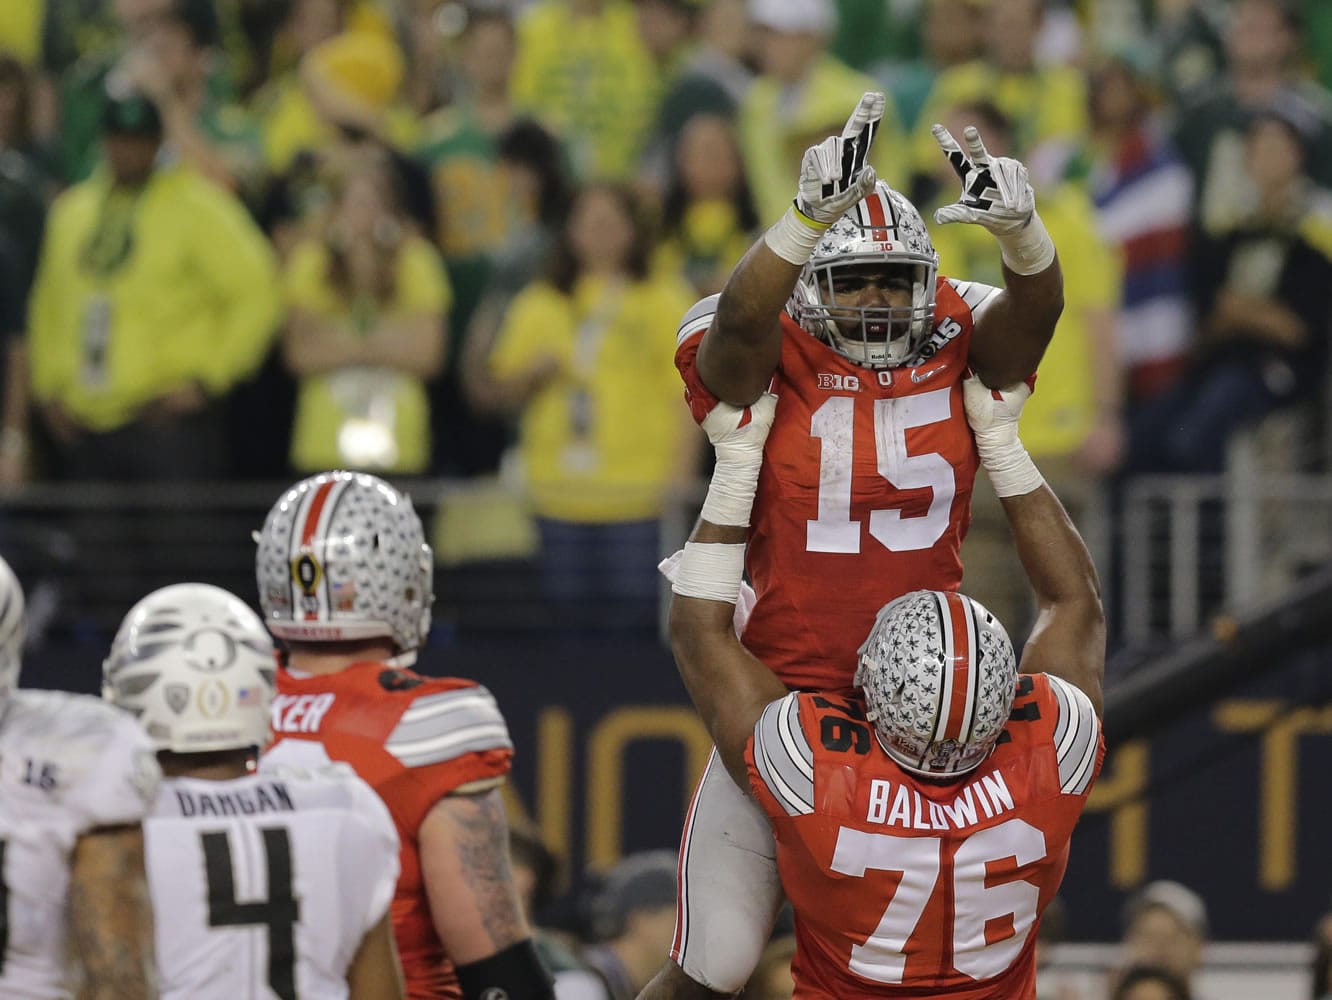 Ohio State running back Ezekiel Elliott (15) celebrates following a touchdown during the second half of the NCAA college football playoff championship game against Oregon Monday, Jan. 12, 2015, in Arlington, Texas.